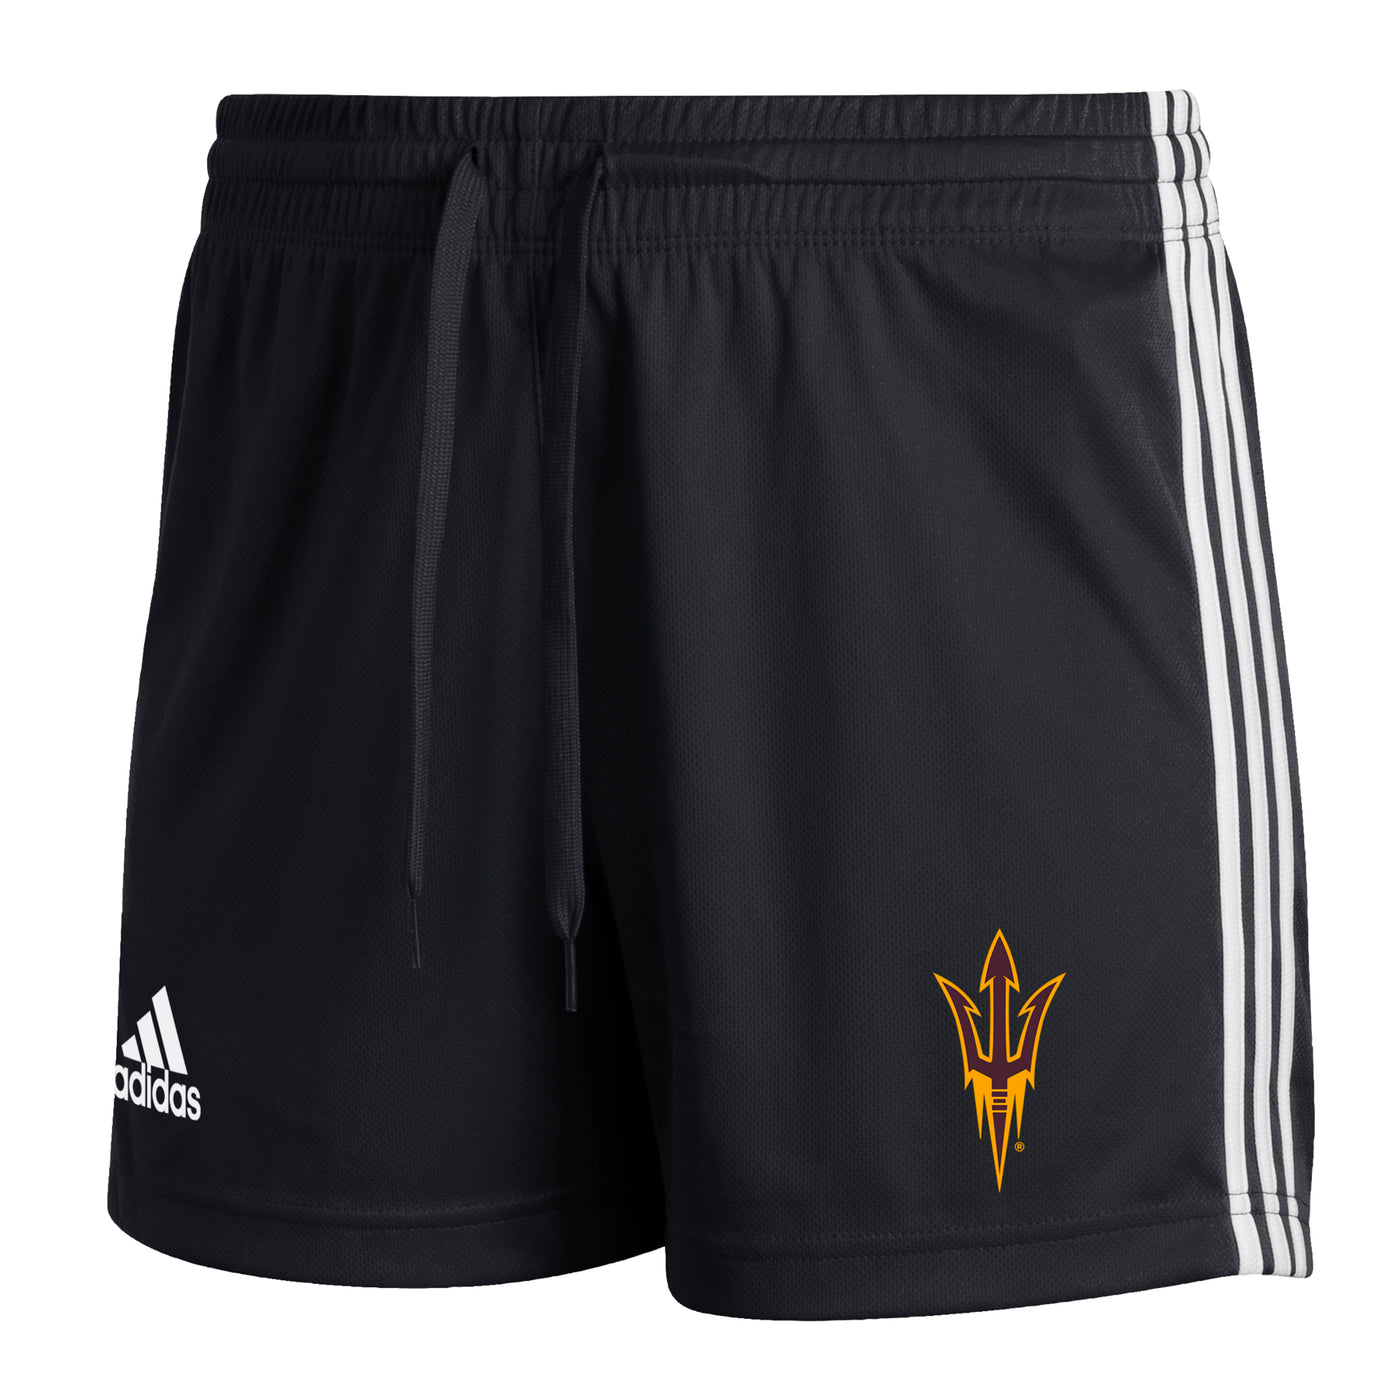 ASU women's black shorts with 3 white stripes down the sides, an Adidas logo on one leg and a pitchfork on the other